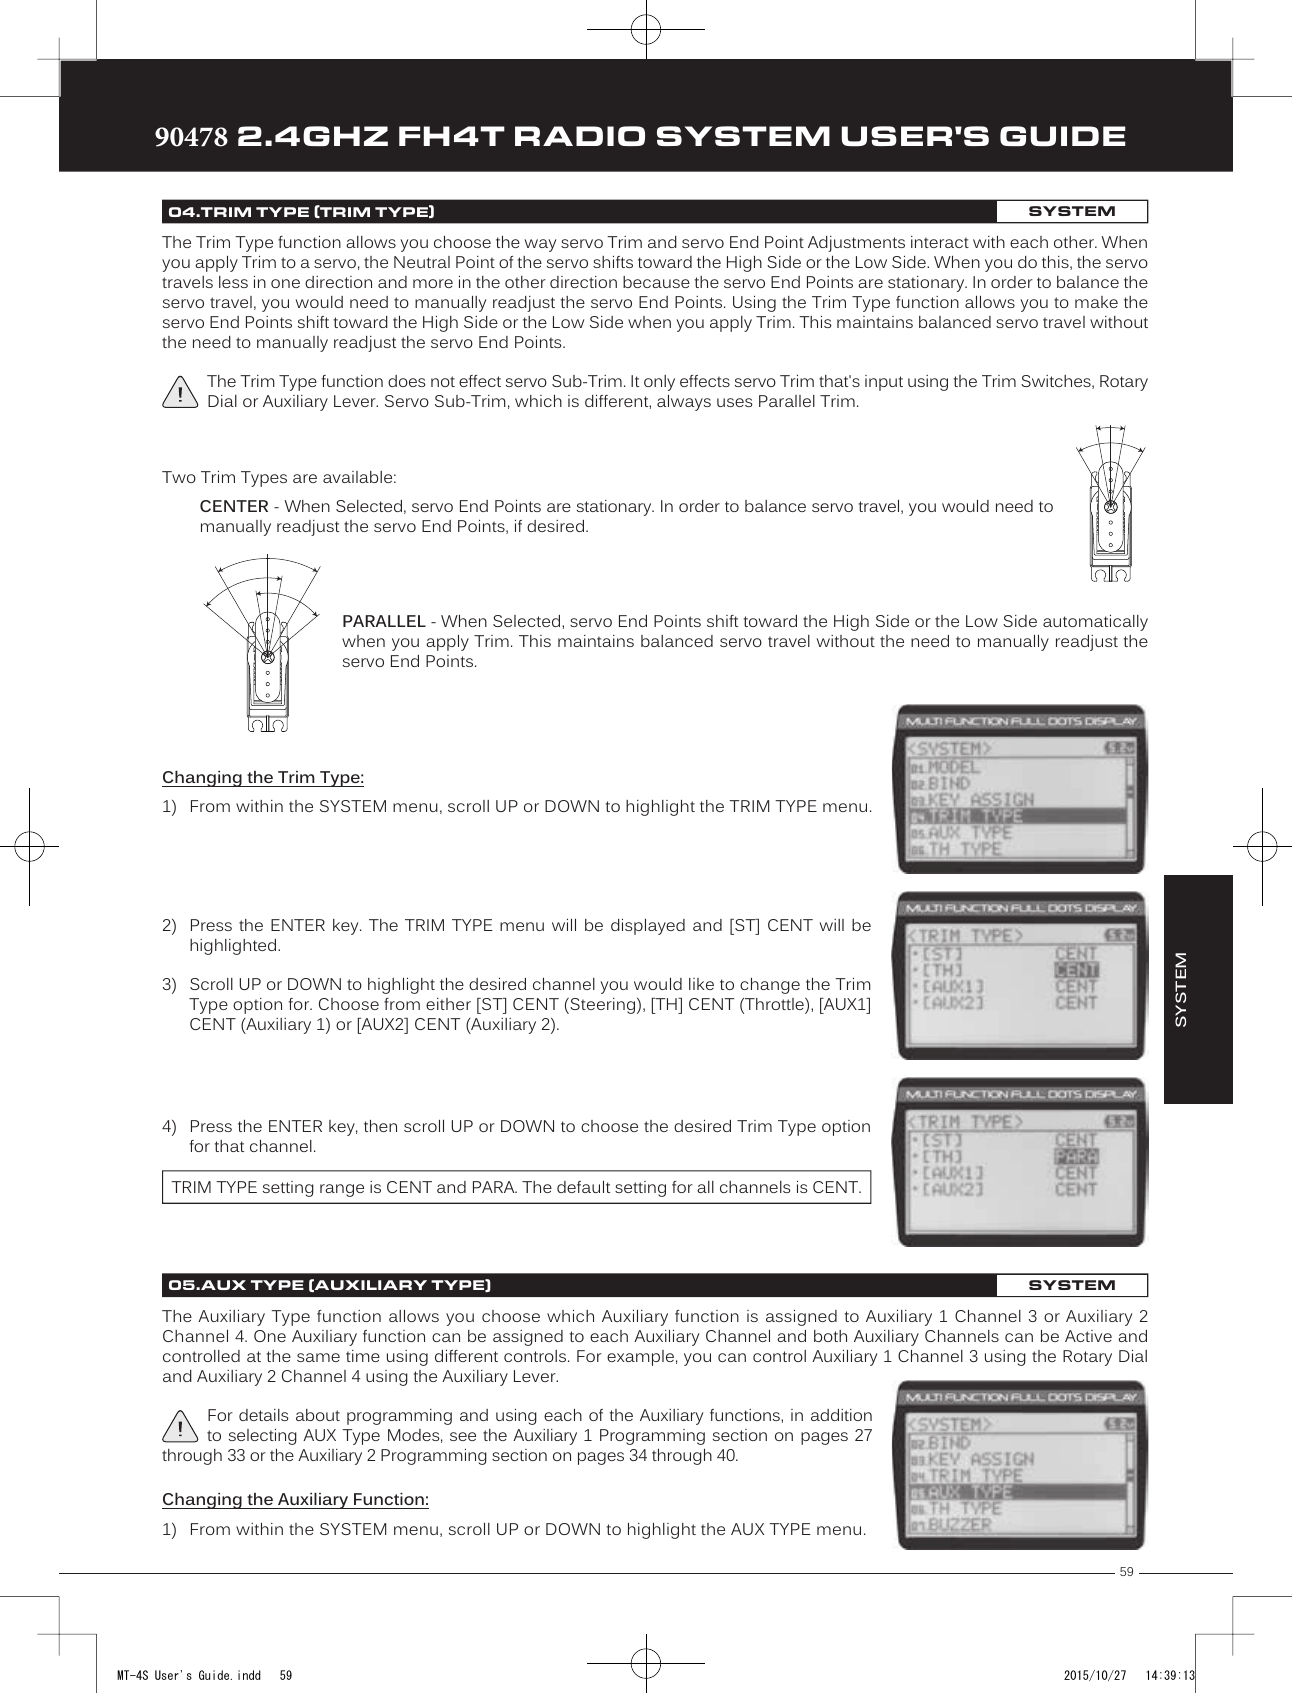 59TRTRTR90478 2.4GHZ FH4T RADIO SYSTEM USER&apos;S GUIDEChanging the Trim Type:1) From within the  SYSTEM menu, scroll UP or DOWN to highlight the TRIM TYPE menu.SYSTEM04.TRIM TYPE (TRIM TYPE)SYSTEMThe Trim Type function allows you choose the way servo Trim and servo End Point Adjustments interact with each other. When you apply Trim to a servo, the Neutral Point of the servo shifts toward the High Side or the Low Side. When you do this, the servo travels less in one direction and more in  the other direction because the servo End Points are stationary. In order to balance the servo travel, you would need to manually readjust the servo End Points. Using the Trim Type function allows you to make the servo End Points shift toward the High Side or the Low Side when you apply Trim. This maintains balanced servo travel without the need to manually readjust the servo End Points.The Trim Type function does not effect servo Sub-Trim. It only effects servo Trim that&apos;s input using the Trim Switches, Rotary Dial or Auxiliary Lever. Servo Sub-Trim, which is different, always uses Parallel Trim.Two Trim Types are available: CENTER - When Selected, servo End Points are stationary. In order to balance servo travel, you would need to manually readjust the servo End Points, if desired.PARALLEL - When Selected, servo End Points shift toward the High Side or the Low Side automatically when you apply Trim. This maintains balanced servo travel without the need to manually readjust the servo End Points. 2) Press the ENTER  key. The TRIM  TYPE menu will  be displayed  and [ST] CENT  will behighlighted.3) Scroll UP or DOWN to highlight the desired channel you would like to change the TrimType option for. Choose from either [ST] CENT (Steering), [TH] CENT (Throttle), [AUX1]CENT (Auxiliary 1) or [AUX2] CENT (Auxiliary 2).4) Press the ENTER key, then scroll UP or DOWN to choose the desired Trim Type optionfor that channel.TRIM TYPE setting range is CENT and PARA. The default setting for all channels is CENT.The Auxiliary Type function allows  you choose which Auxiliary function  is assigned to Auxiliary 1  Channel  3 or Auxiliary 2 Channel 4. One Auxiliary function can be assigned to each  Auxiliary Channel and both Auxiliary Channels can be Active and controlled at the same time using different controls. For example, you can control Auxiliary 1 Channel 3 using the Rotary Dial and Auxiliary 2 Channel 4 using the Auxiliary Lever.For details about programming and using each of the Auxiliary functions, in addition to selecting AUX Type Modes, see the Auxiliary 1 Programming  section  on pages 27 through 33 or the Auxiliary 2 Programming section on pages 34 through 40.05.AUX TYPE (AUXILIARY TYPE)SYSTEMChanging the Auxiliary Function:1) From within the SYSTEM menu,  scroll UP or DOWN to highlight the AUX TYPE menu.MT-4S User&apos;s Guide.indd   59 2015/10/27   14:39:13